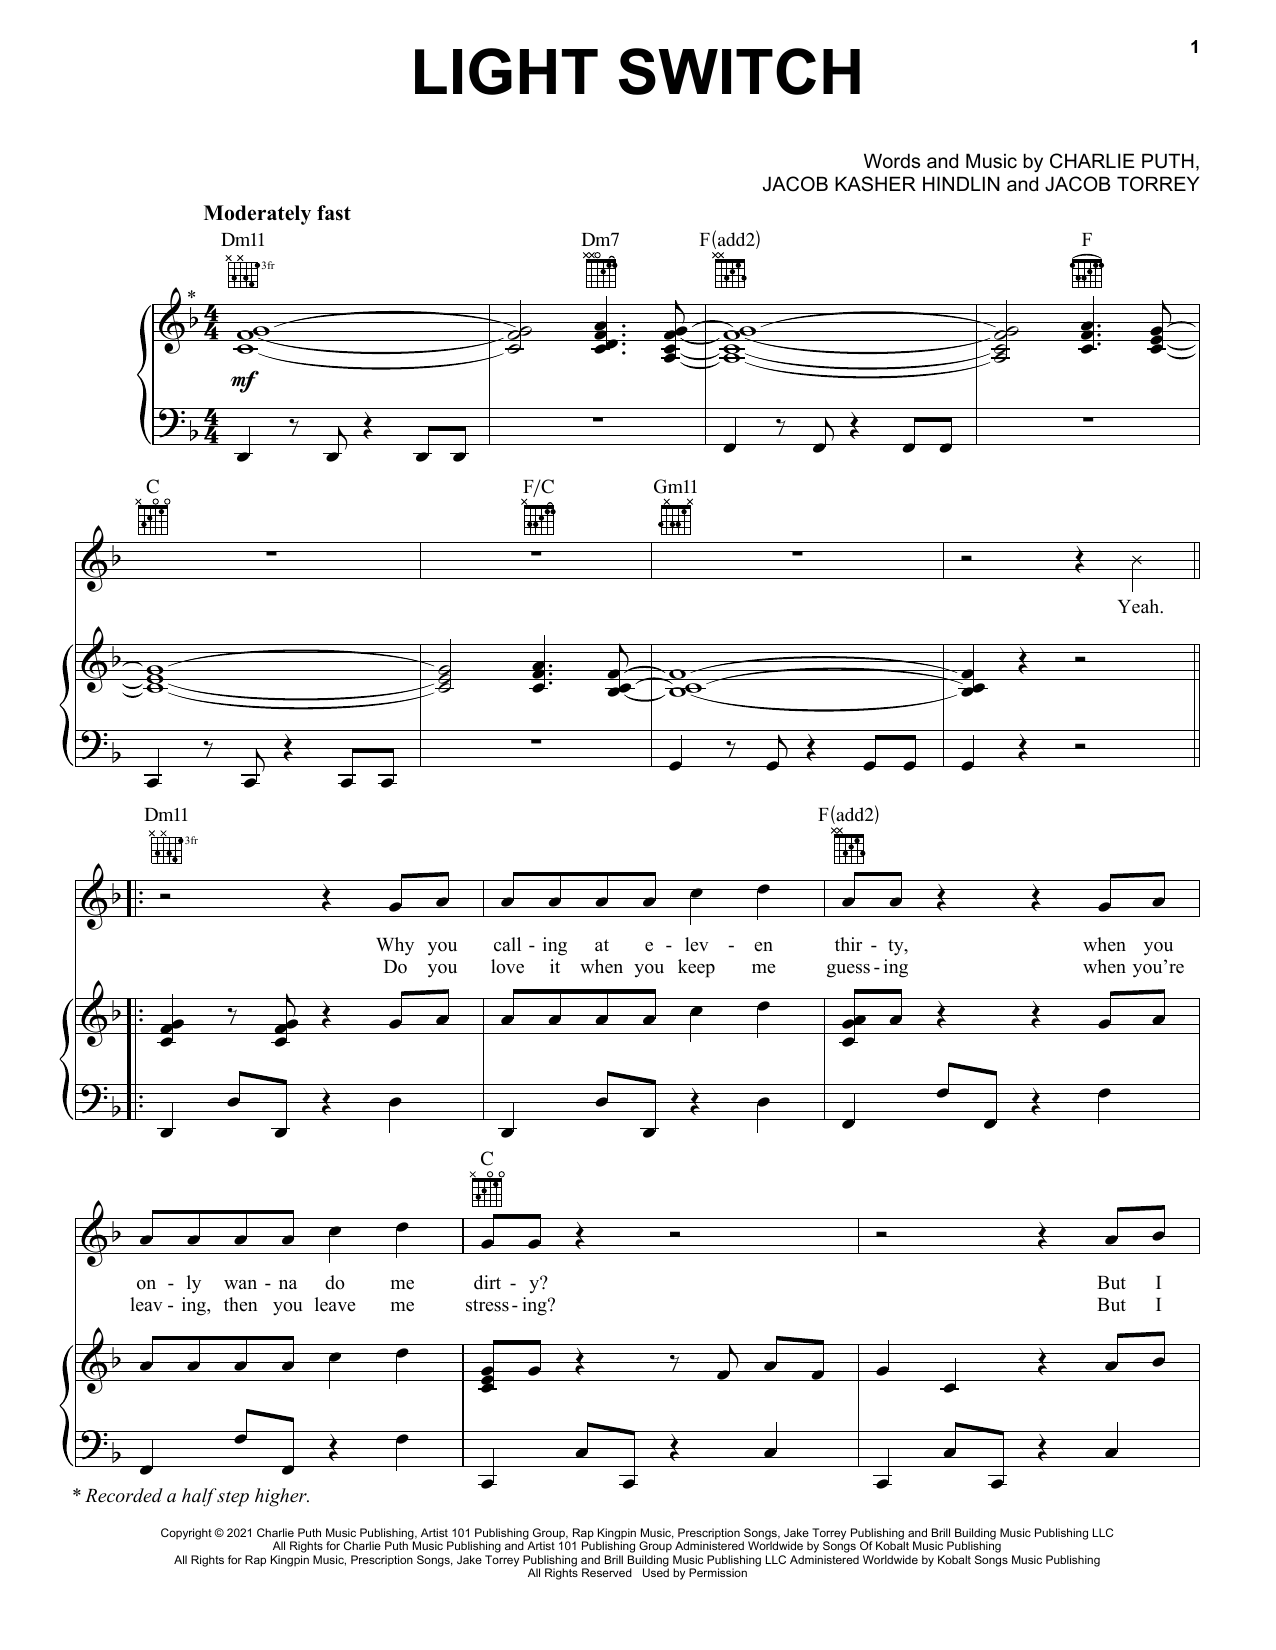 Download Charlie Puth Light Switch Sheet Music